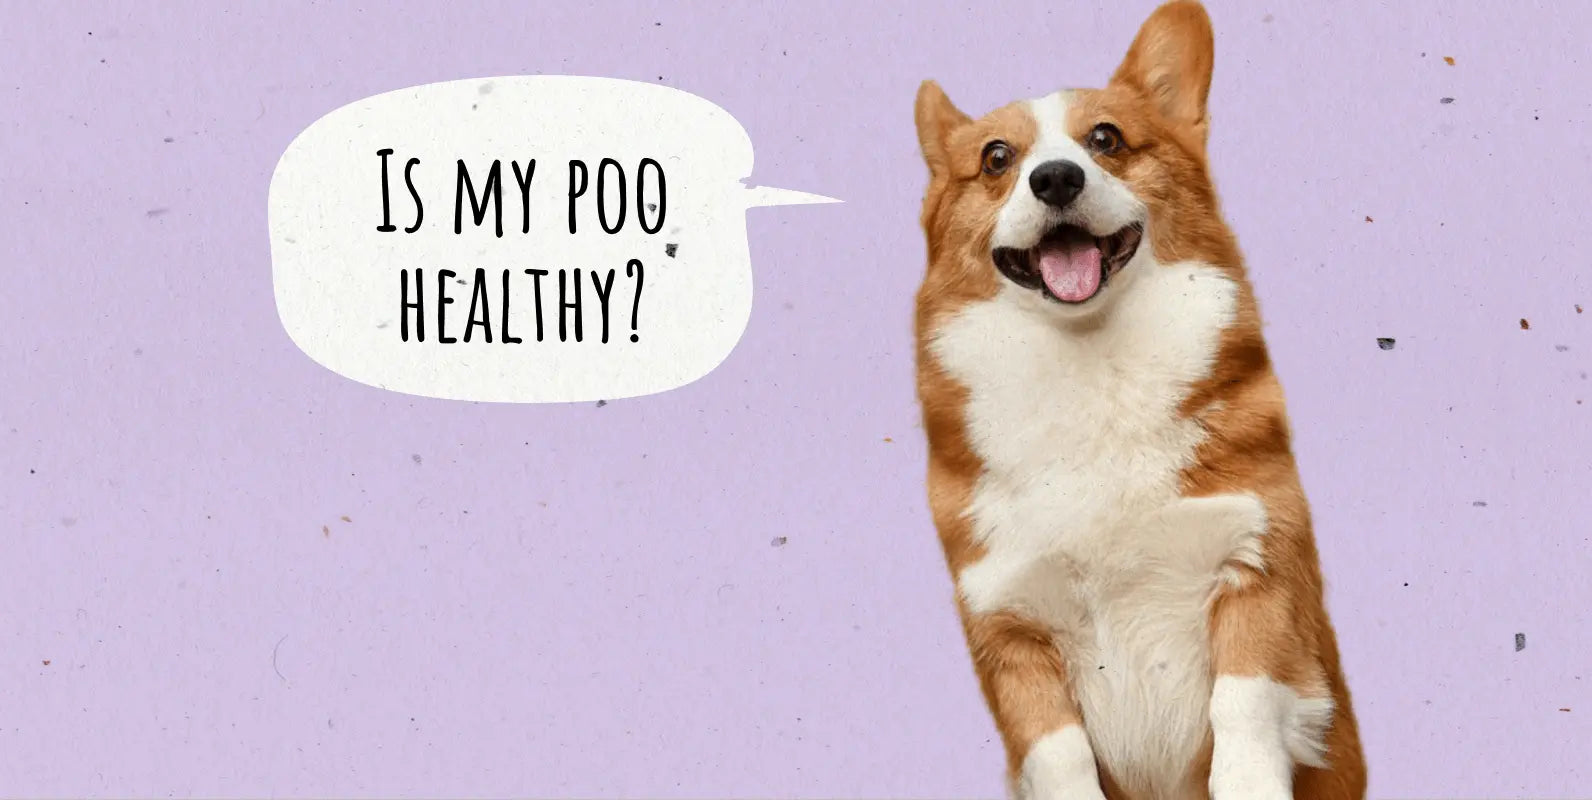 Healthy Dog Poop: The Poop You Want to See